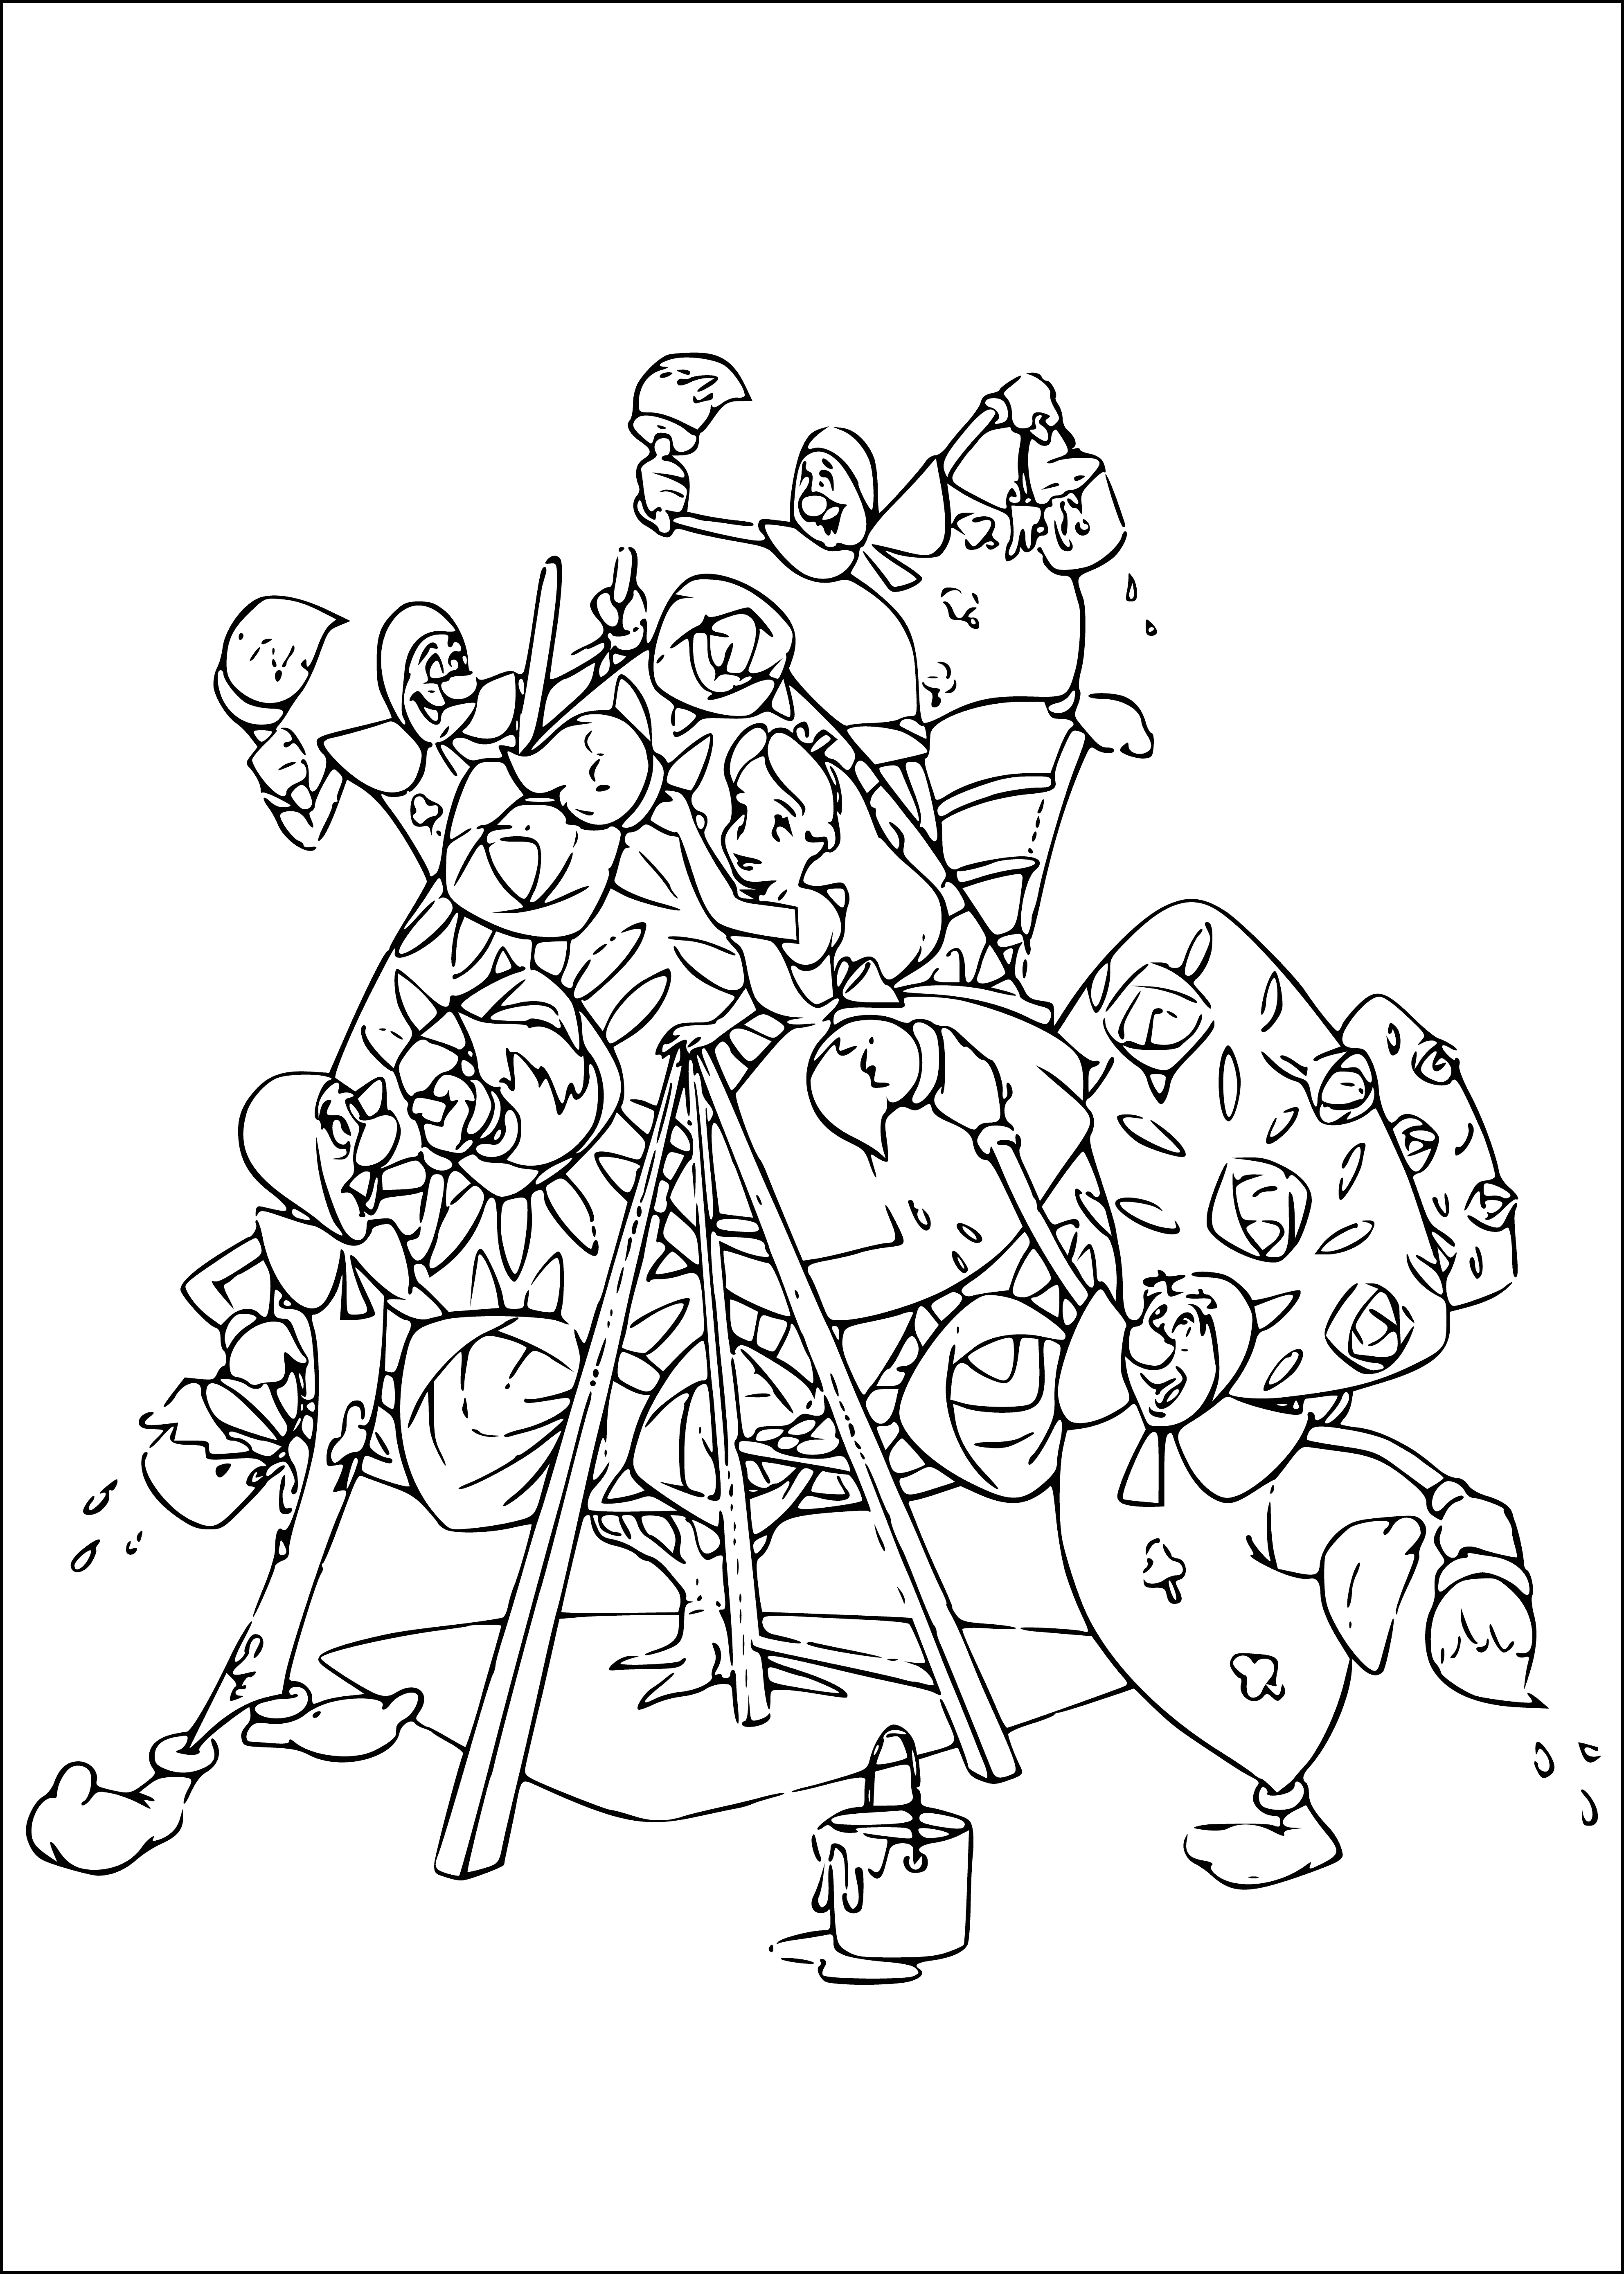 Paint roses coloring page